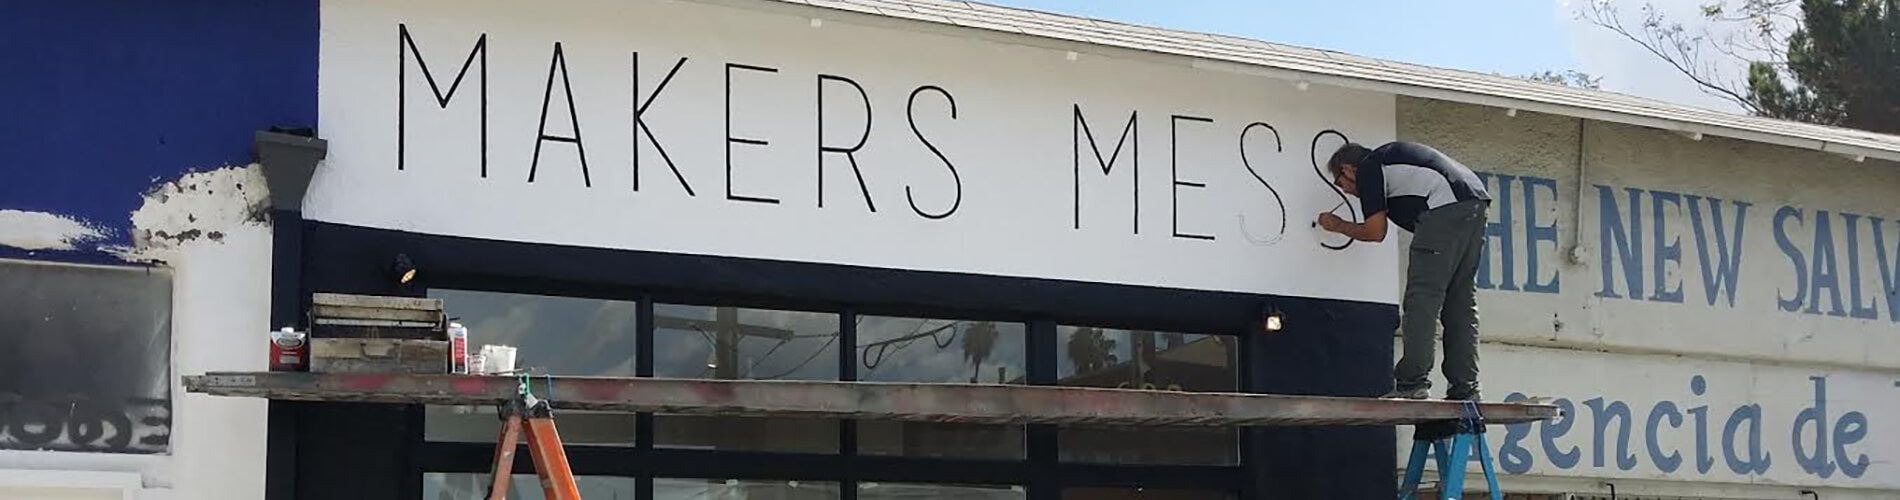 Makers Mess sign